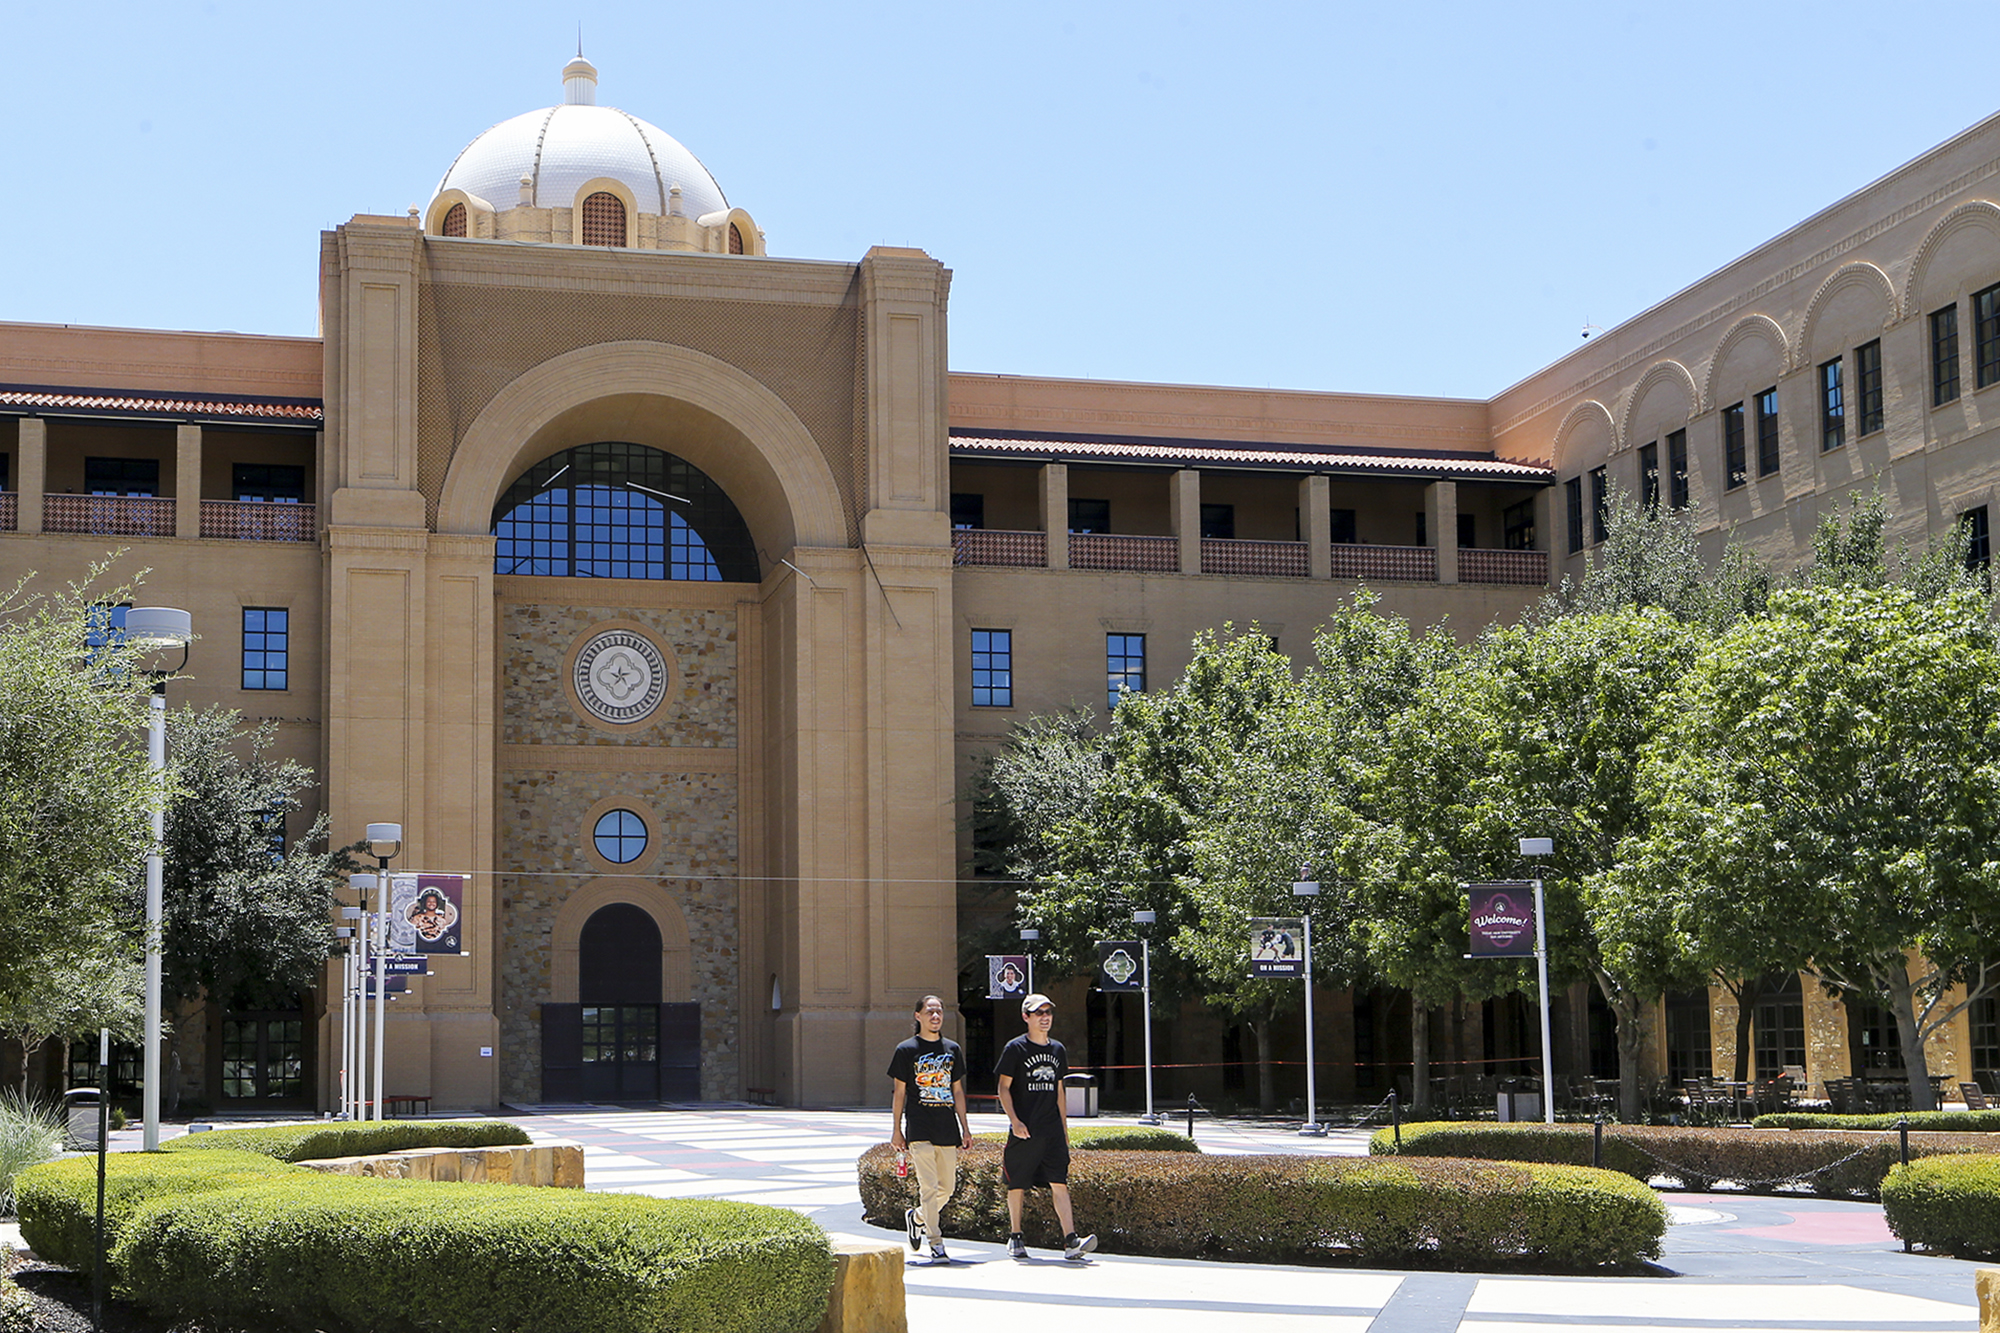 Cultivating academic excellence at Texas A&M University-San Antonio